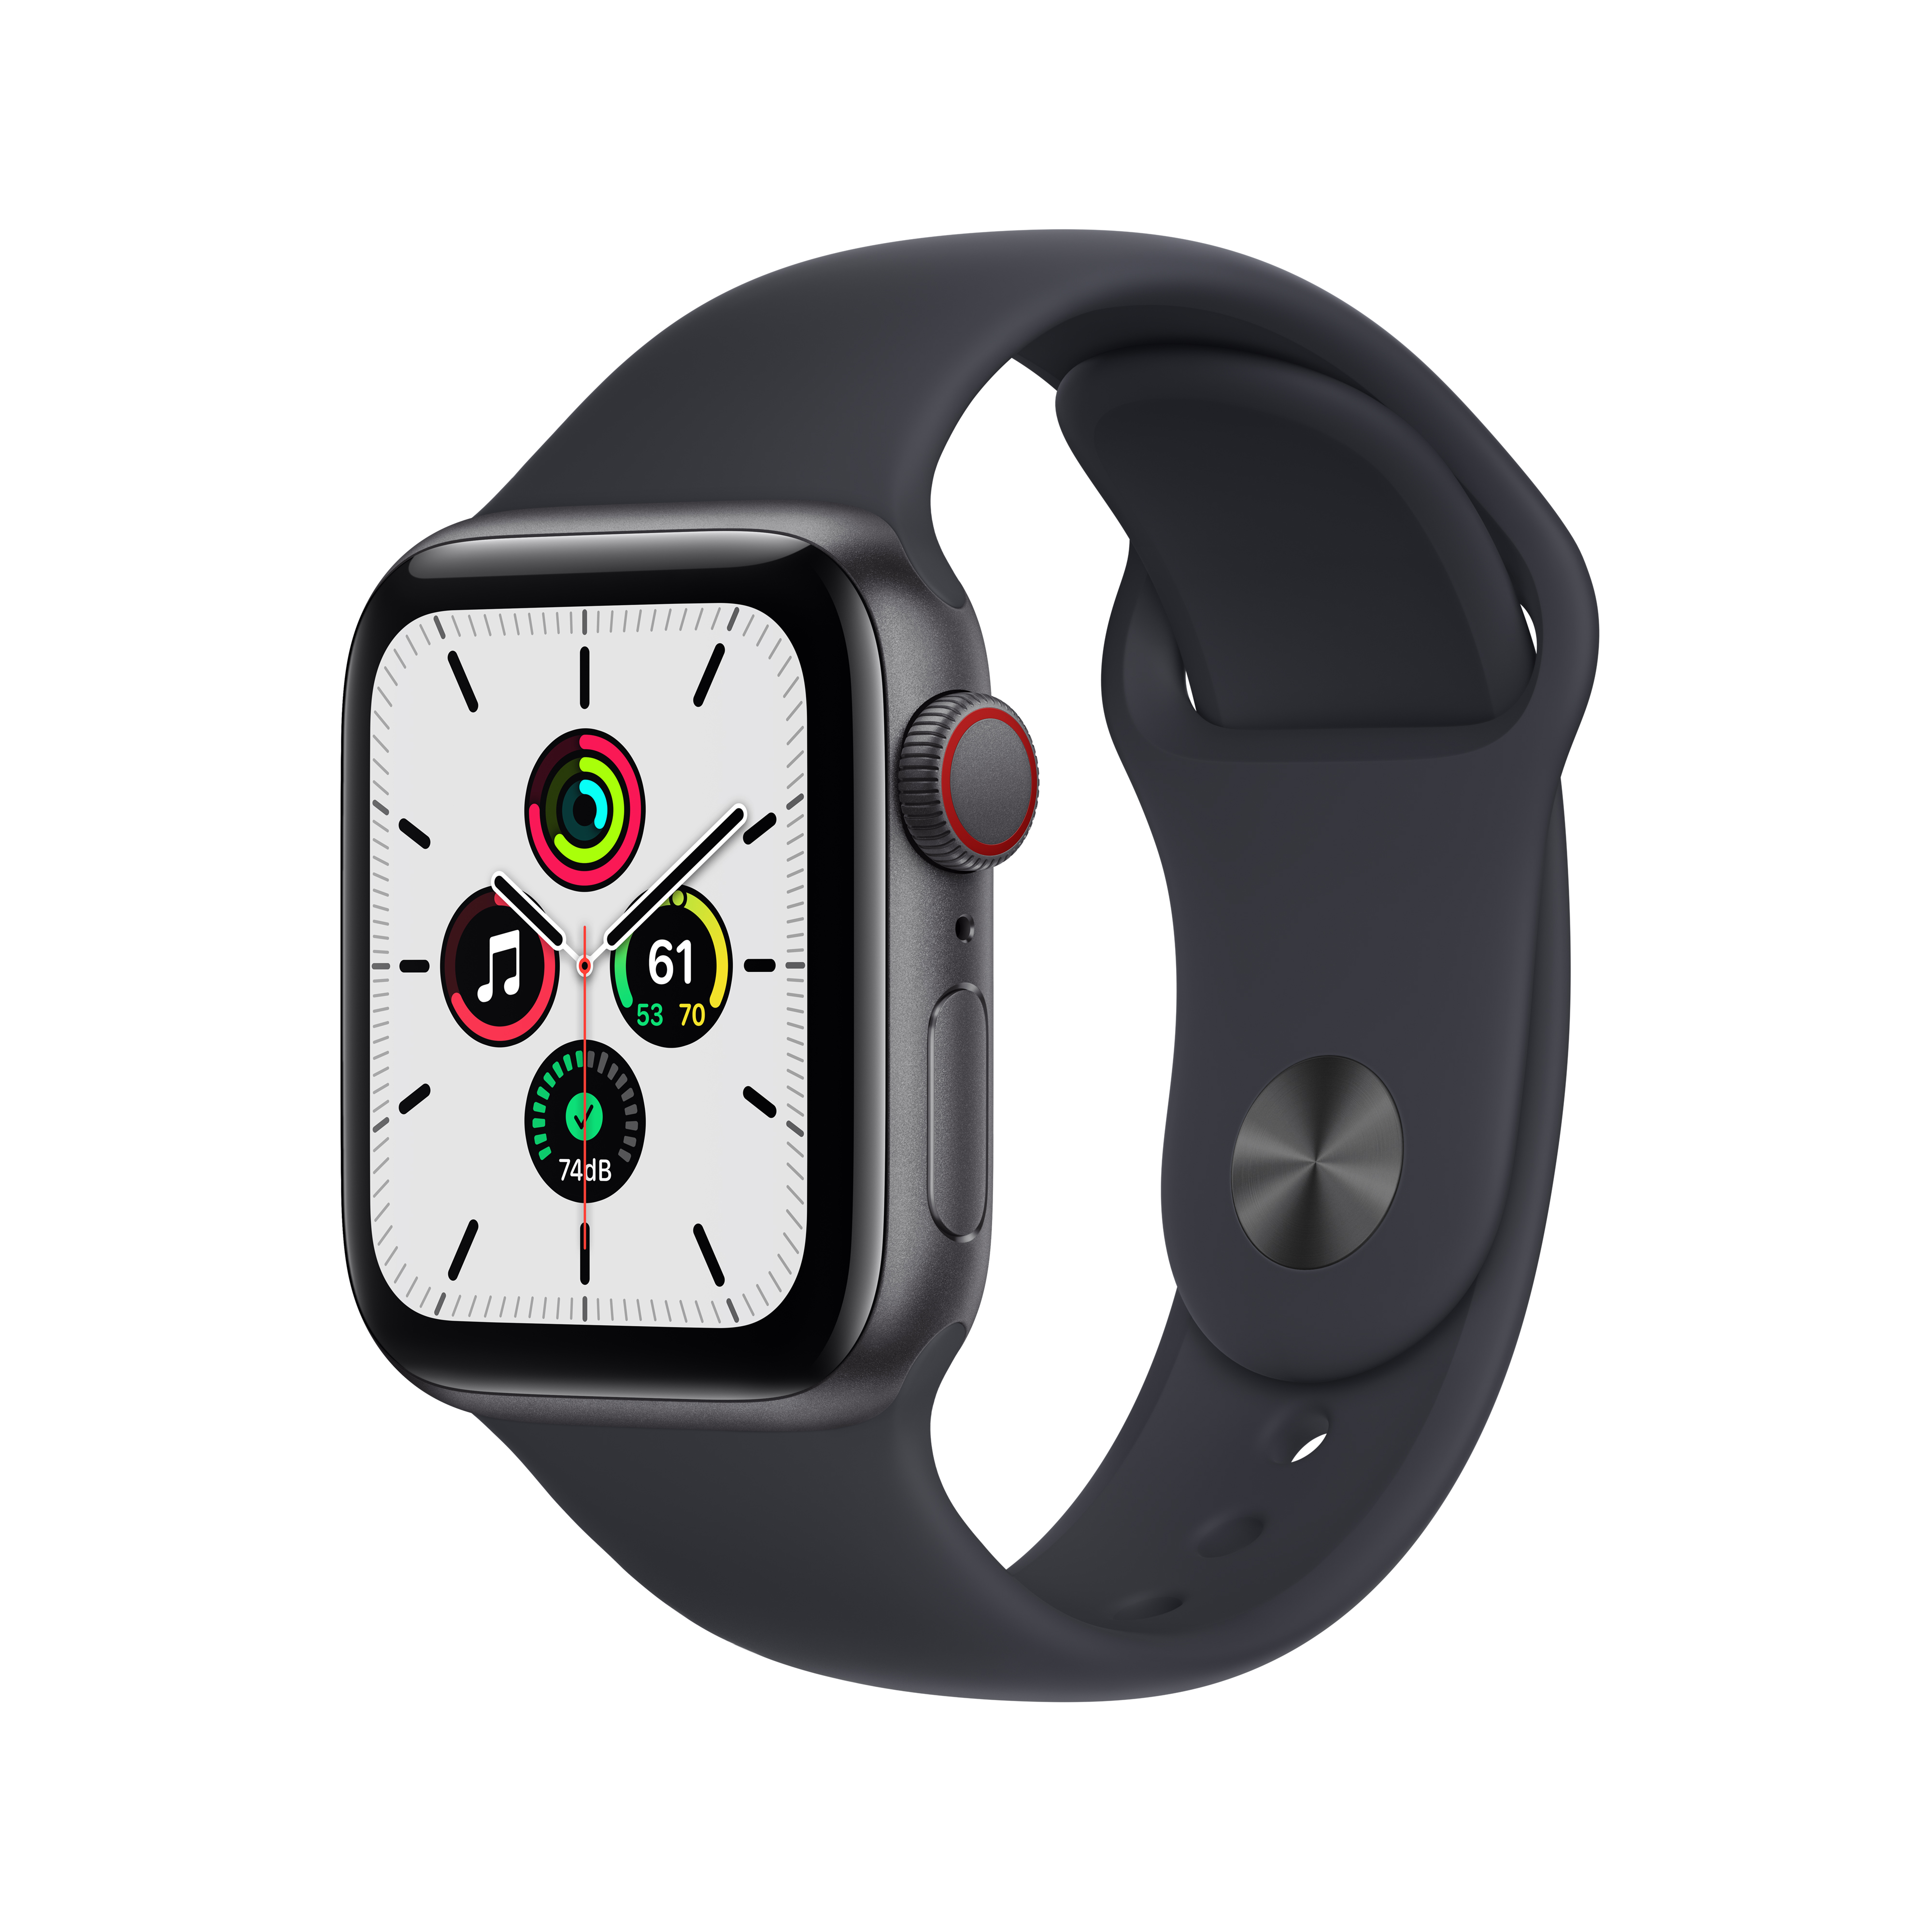 Apple Watch SE (1st Gen) GPS + Cellular 40mm Space Gray Aluminum Case Midnight Sport Band - Regular with Family Set Up - image 1 of 11